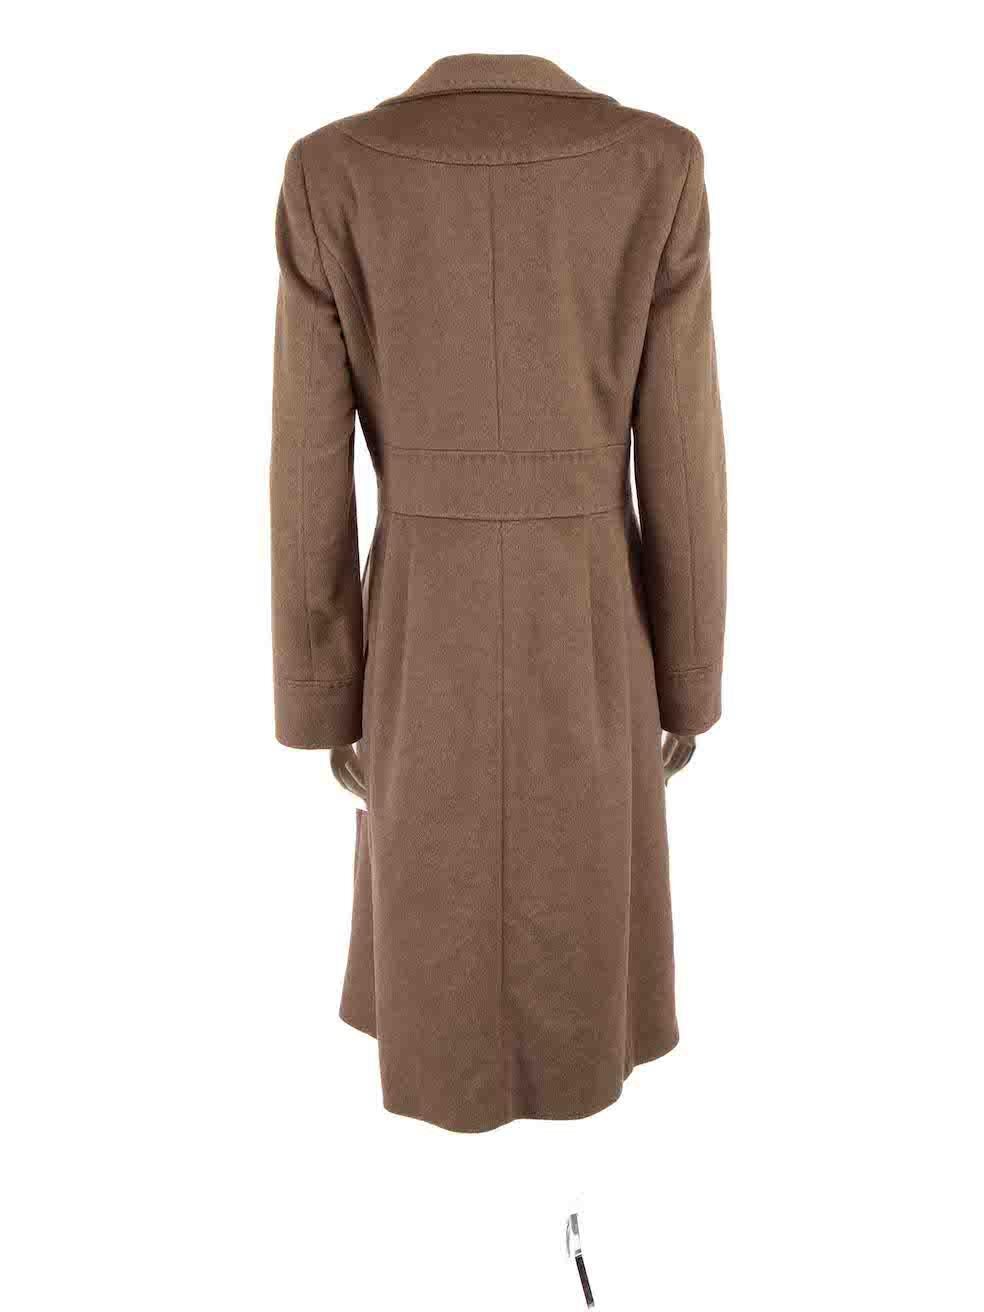 Escada Brown Angora Wool Long Coat Size M In Good Condition For Sale In London, GB